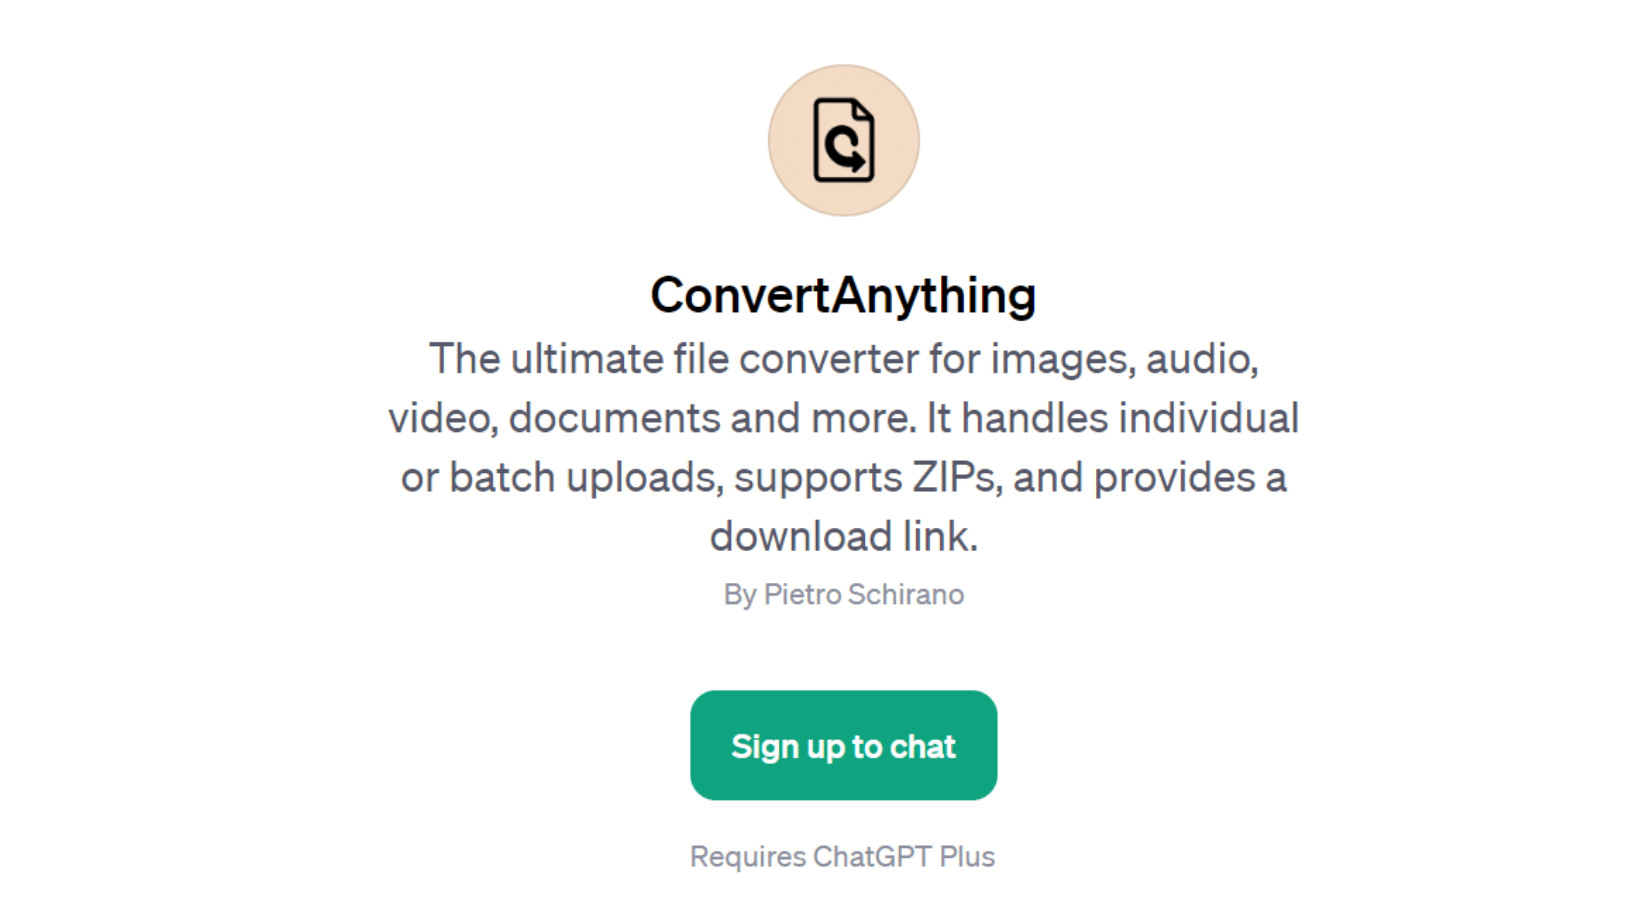 ConvertAnything